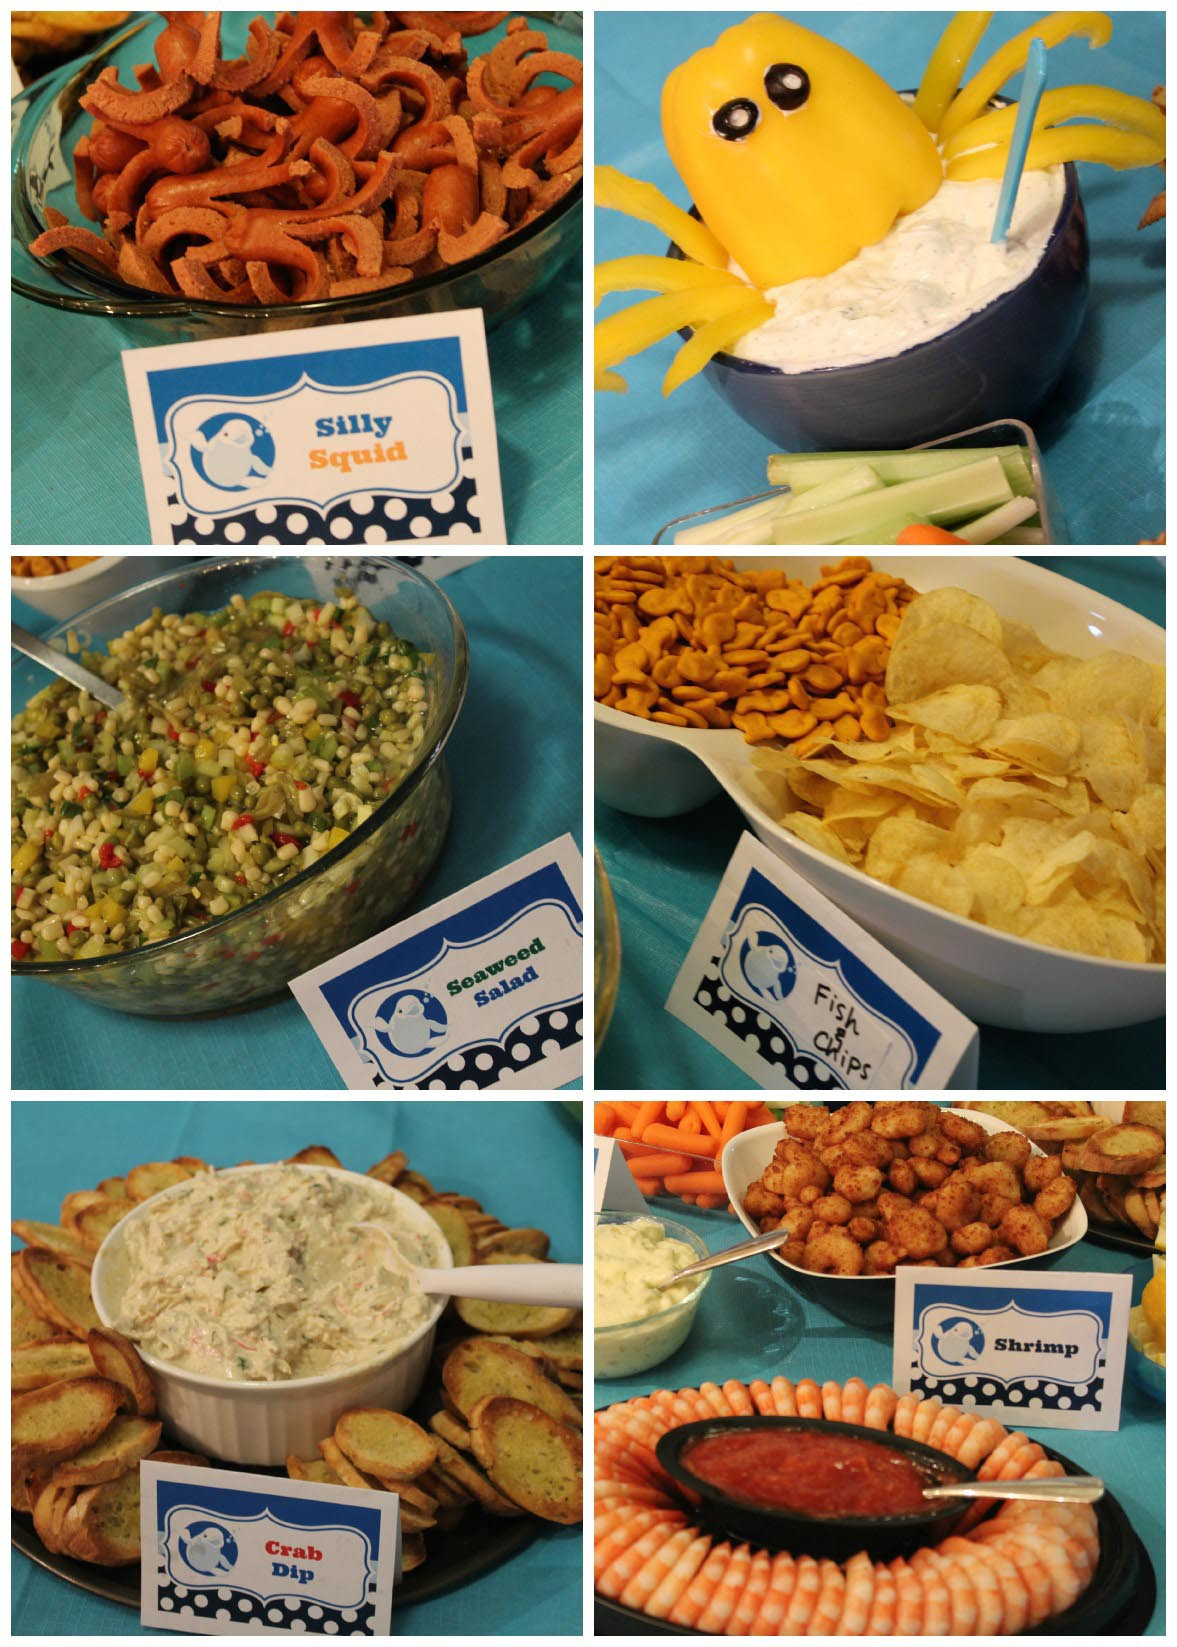 Pirate Party Food Ideas
 Make a Great Pirate Party Food for Your Kid and His Little